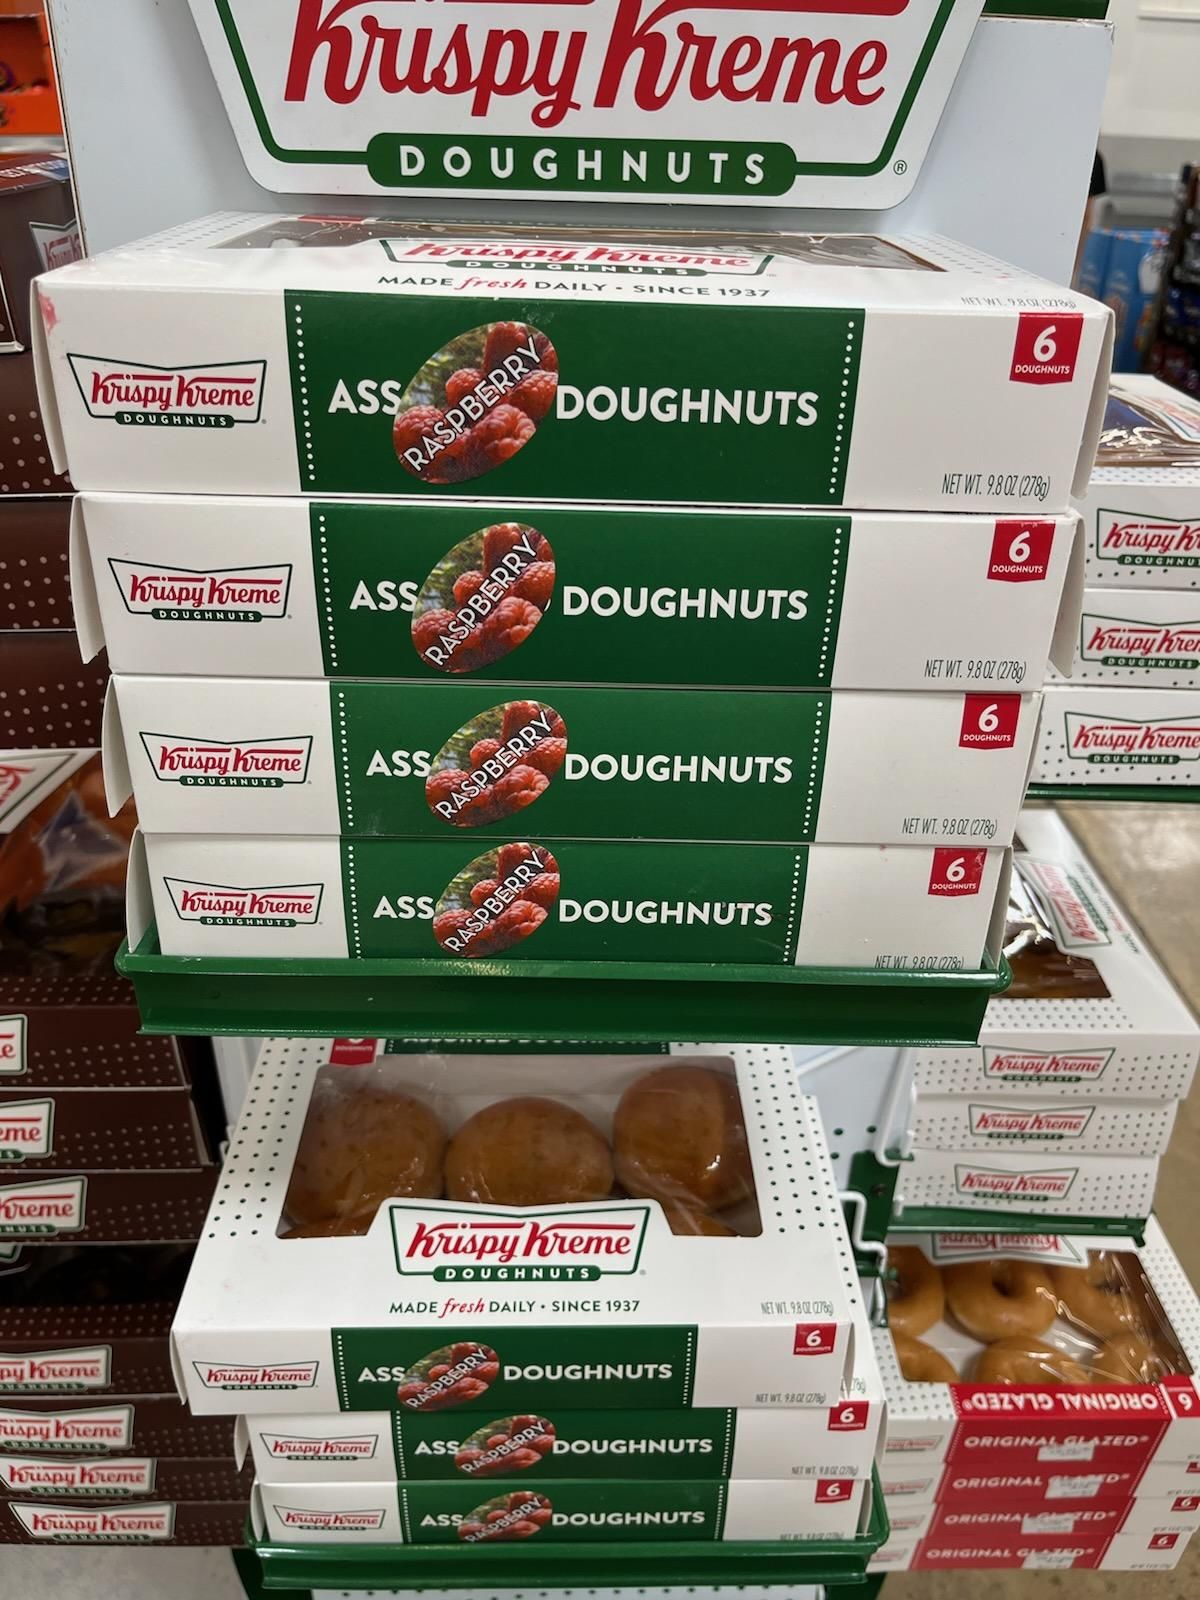 New flavor of donuts at my local grocery store